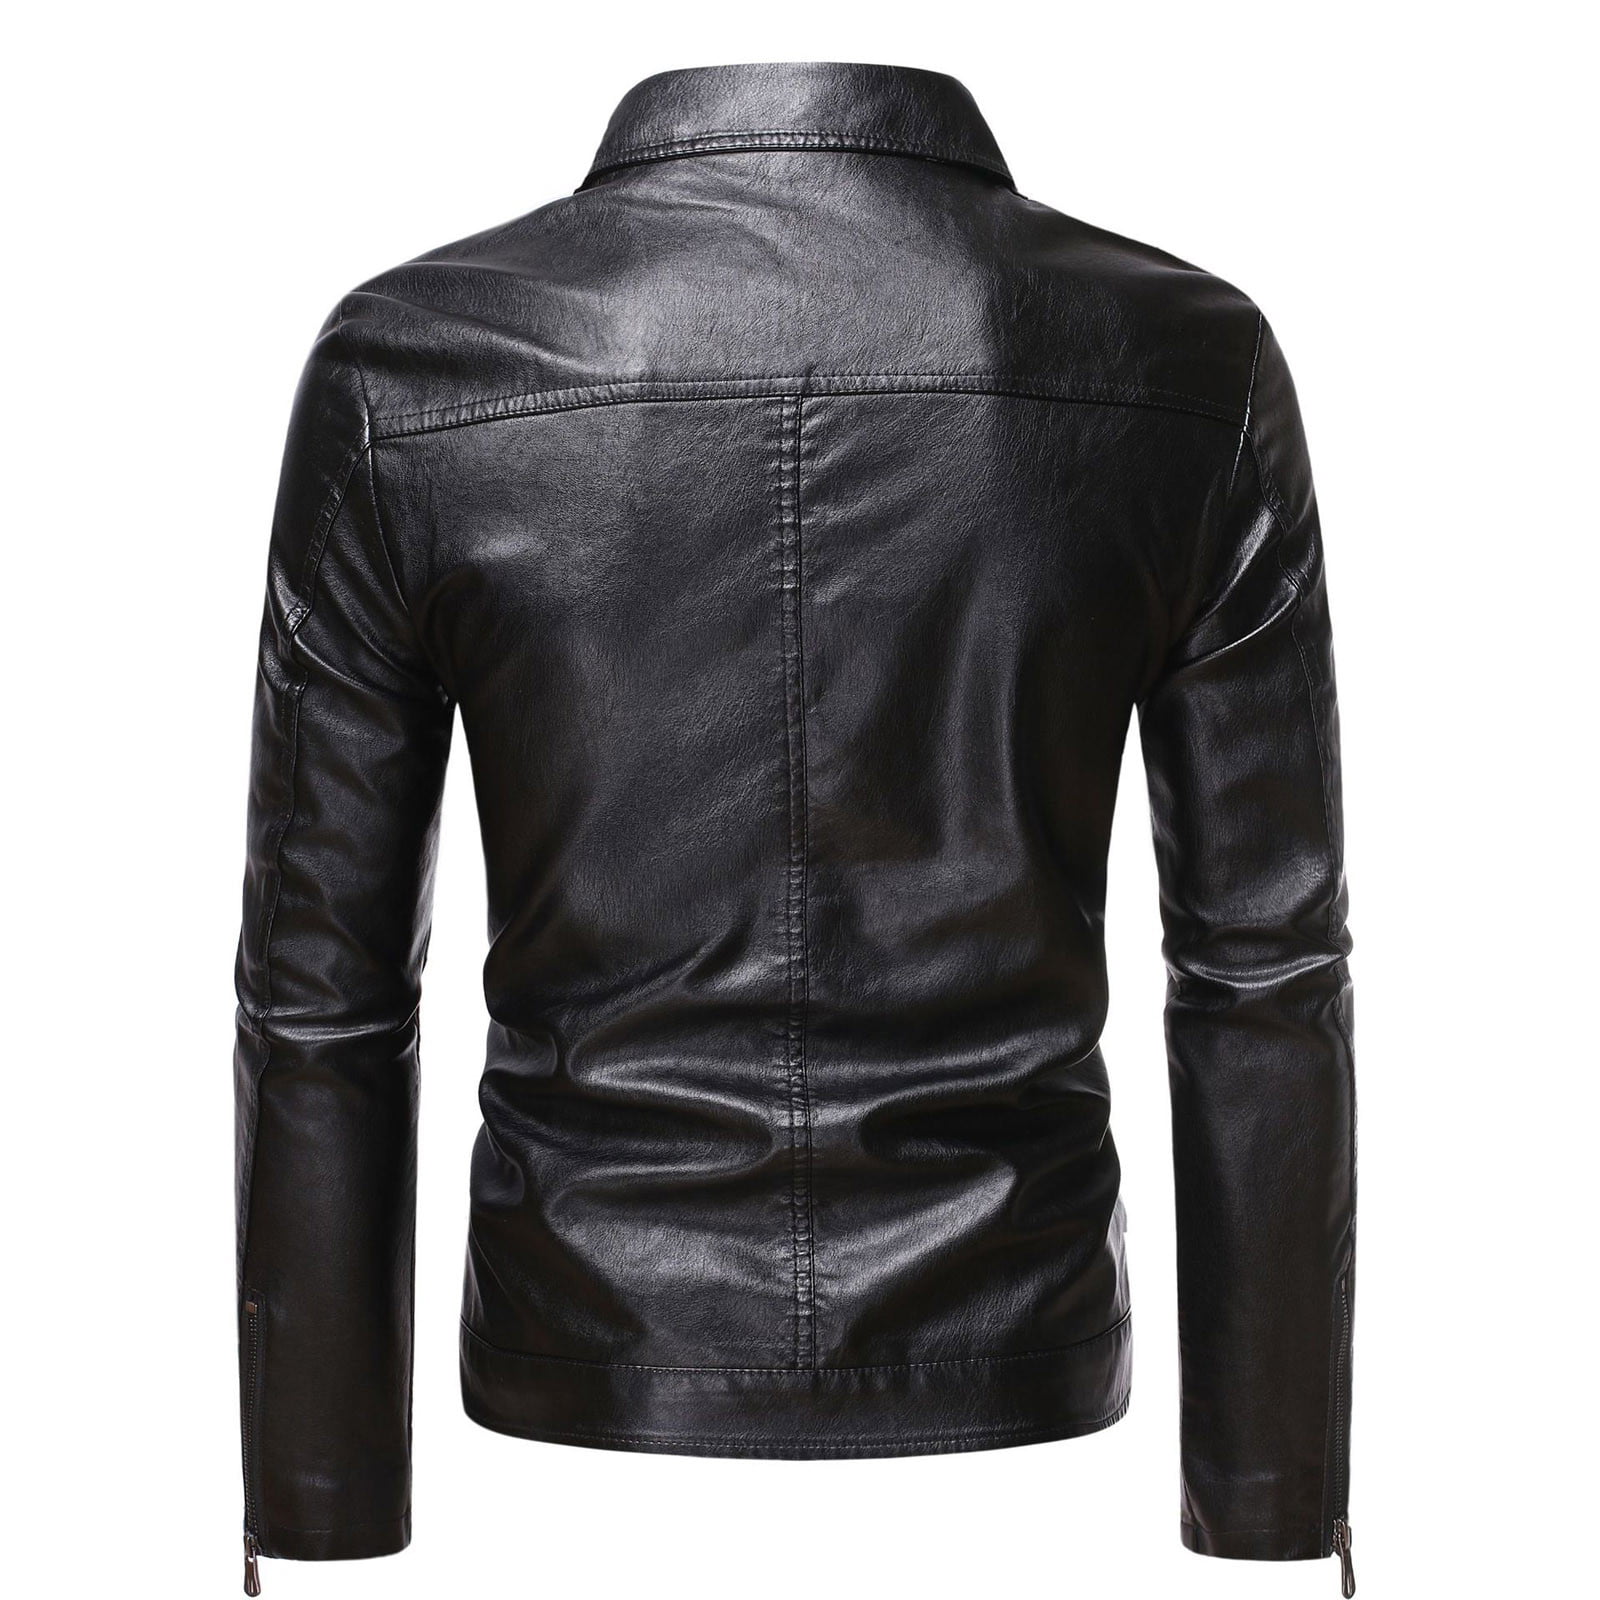 Men's Motorcycle Leather Jacket Large Size Pocket Black Zipper Lapel Slim  Fit Male Spring And Autumn High Quality Pu Coat